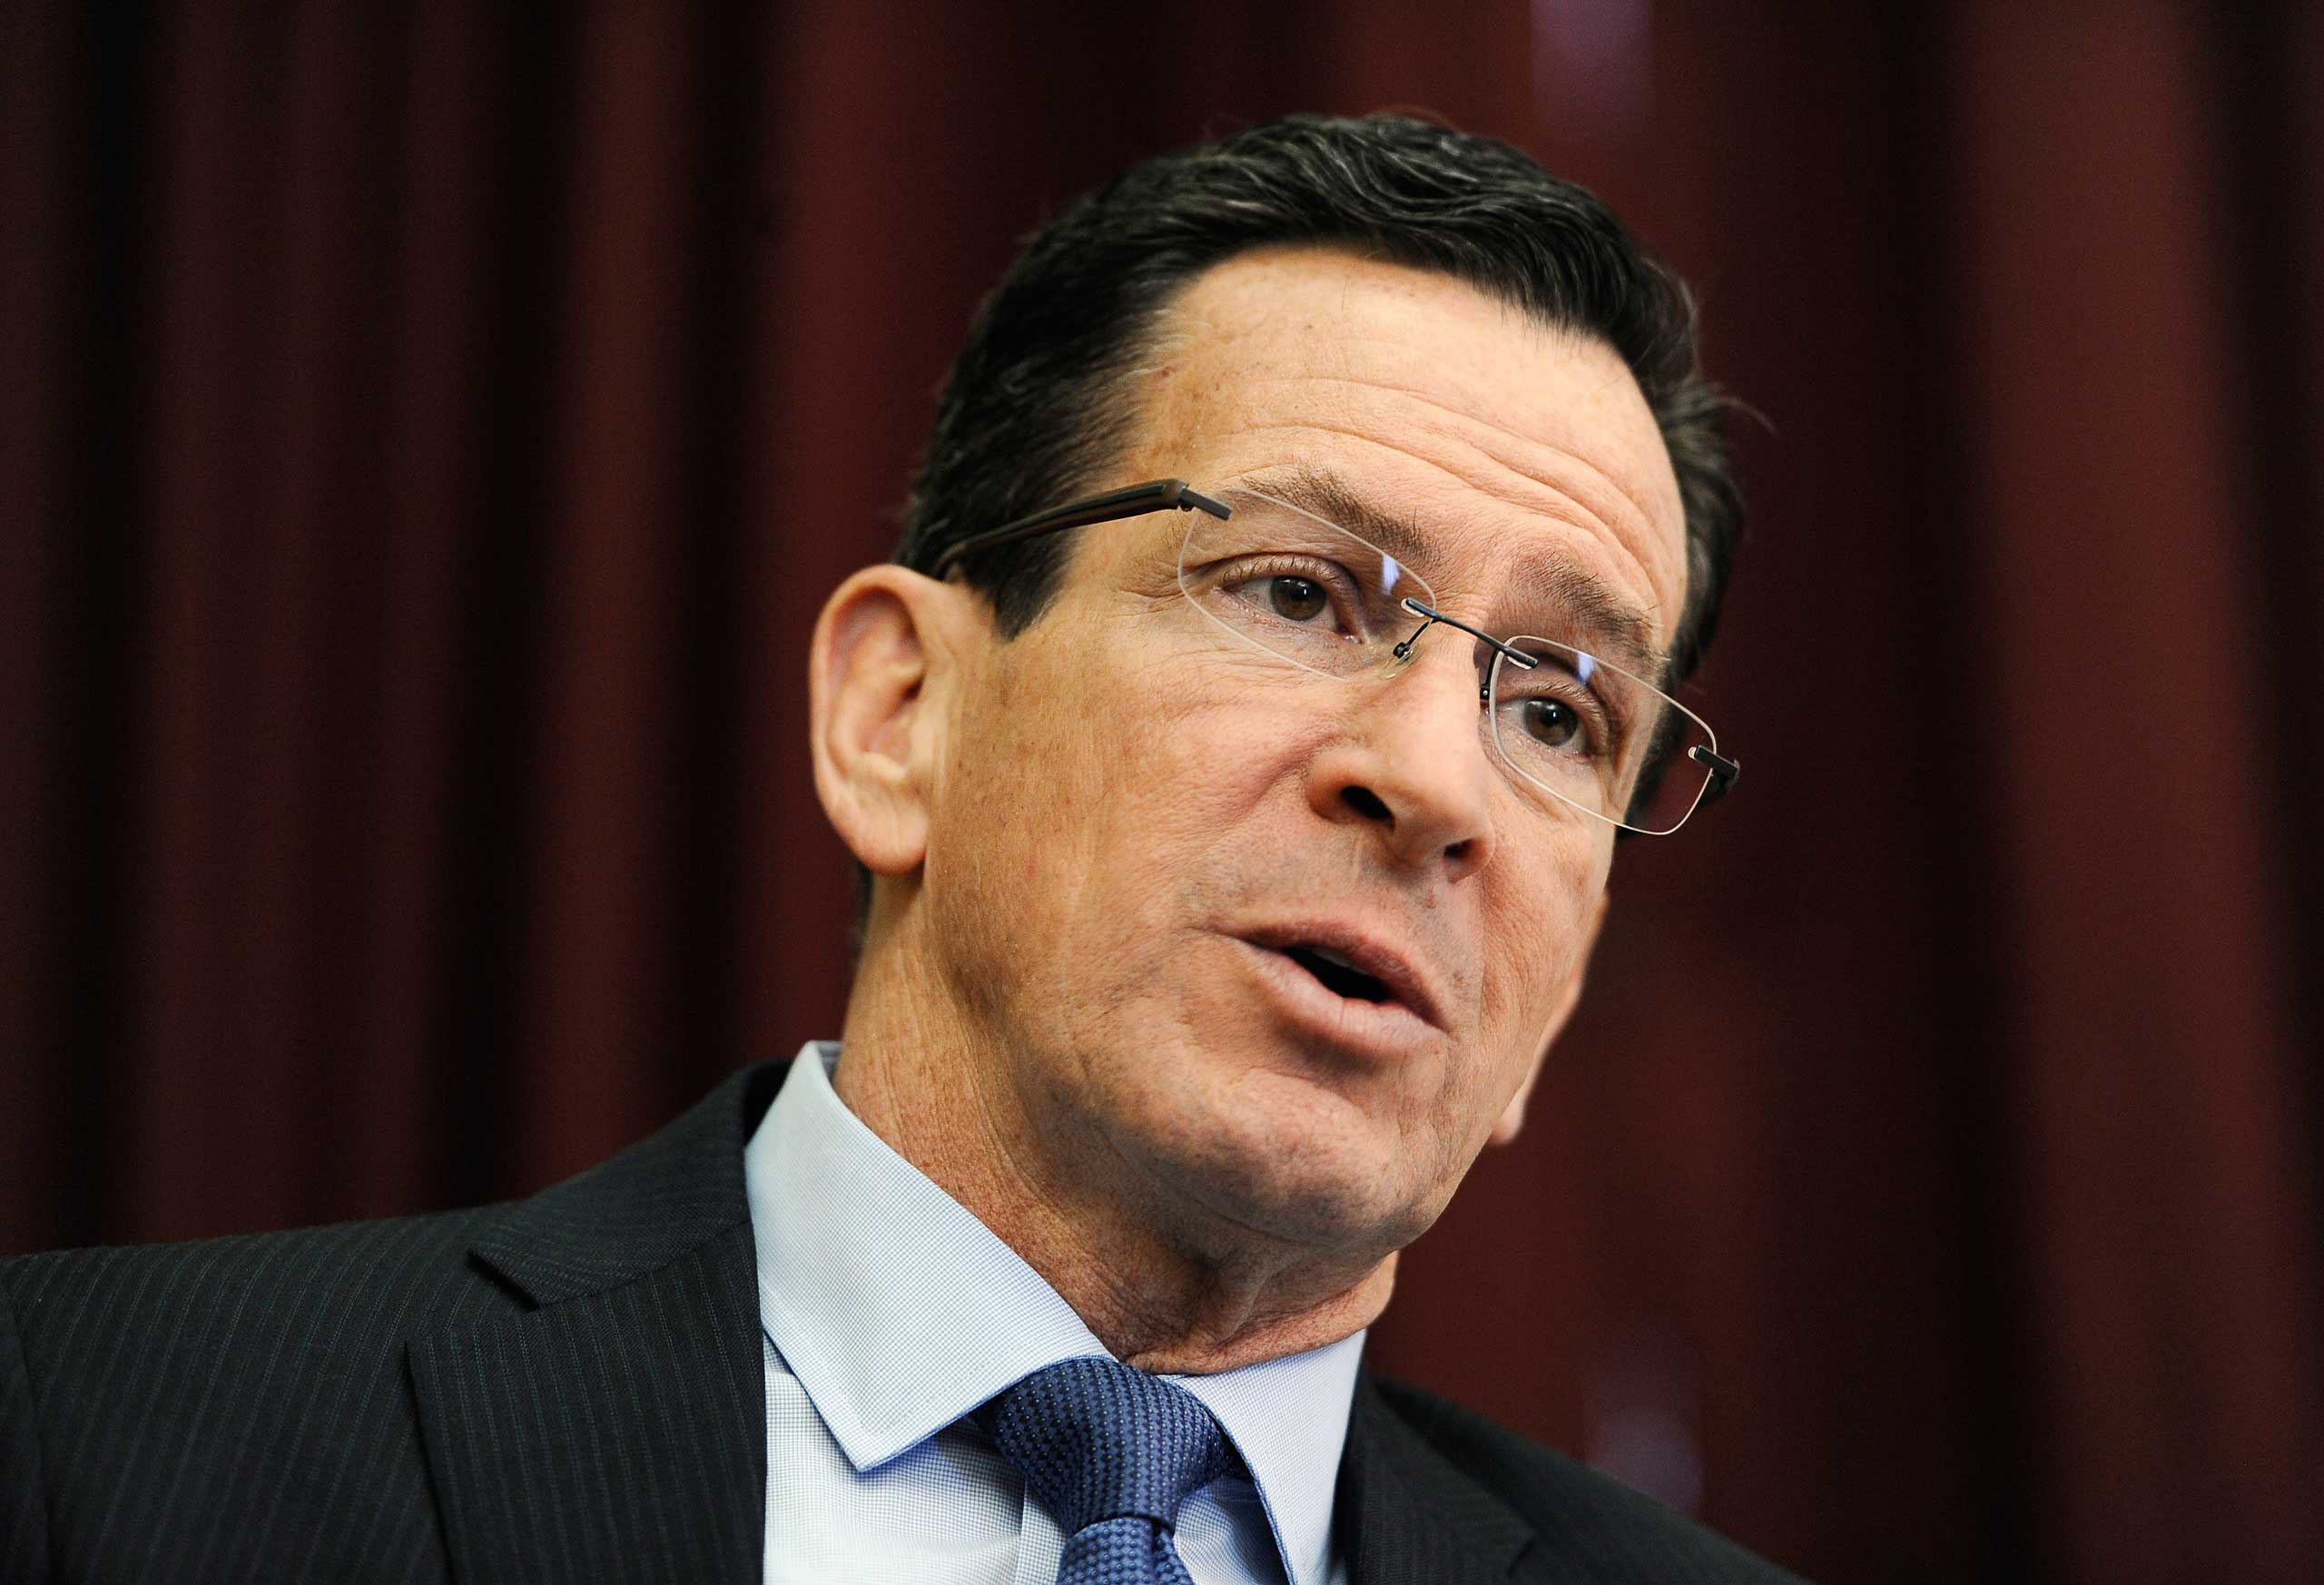 Connecticut Gov. Dannel P. Malloy is interviewed by The Associated Press in his office at the State Capital before he is sworn in for his second term, Jan. 7, 2015, in Hartford, Conn. (Jessica Hill—AP)